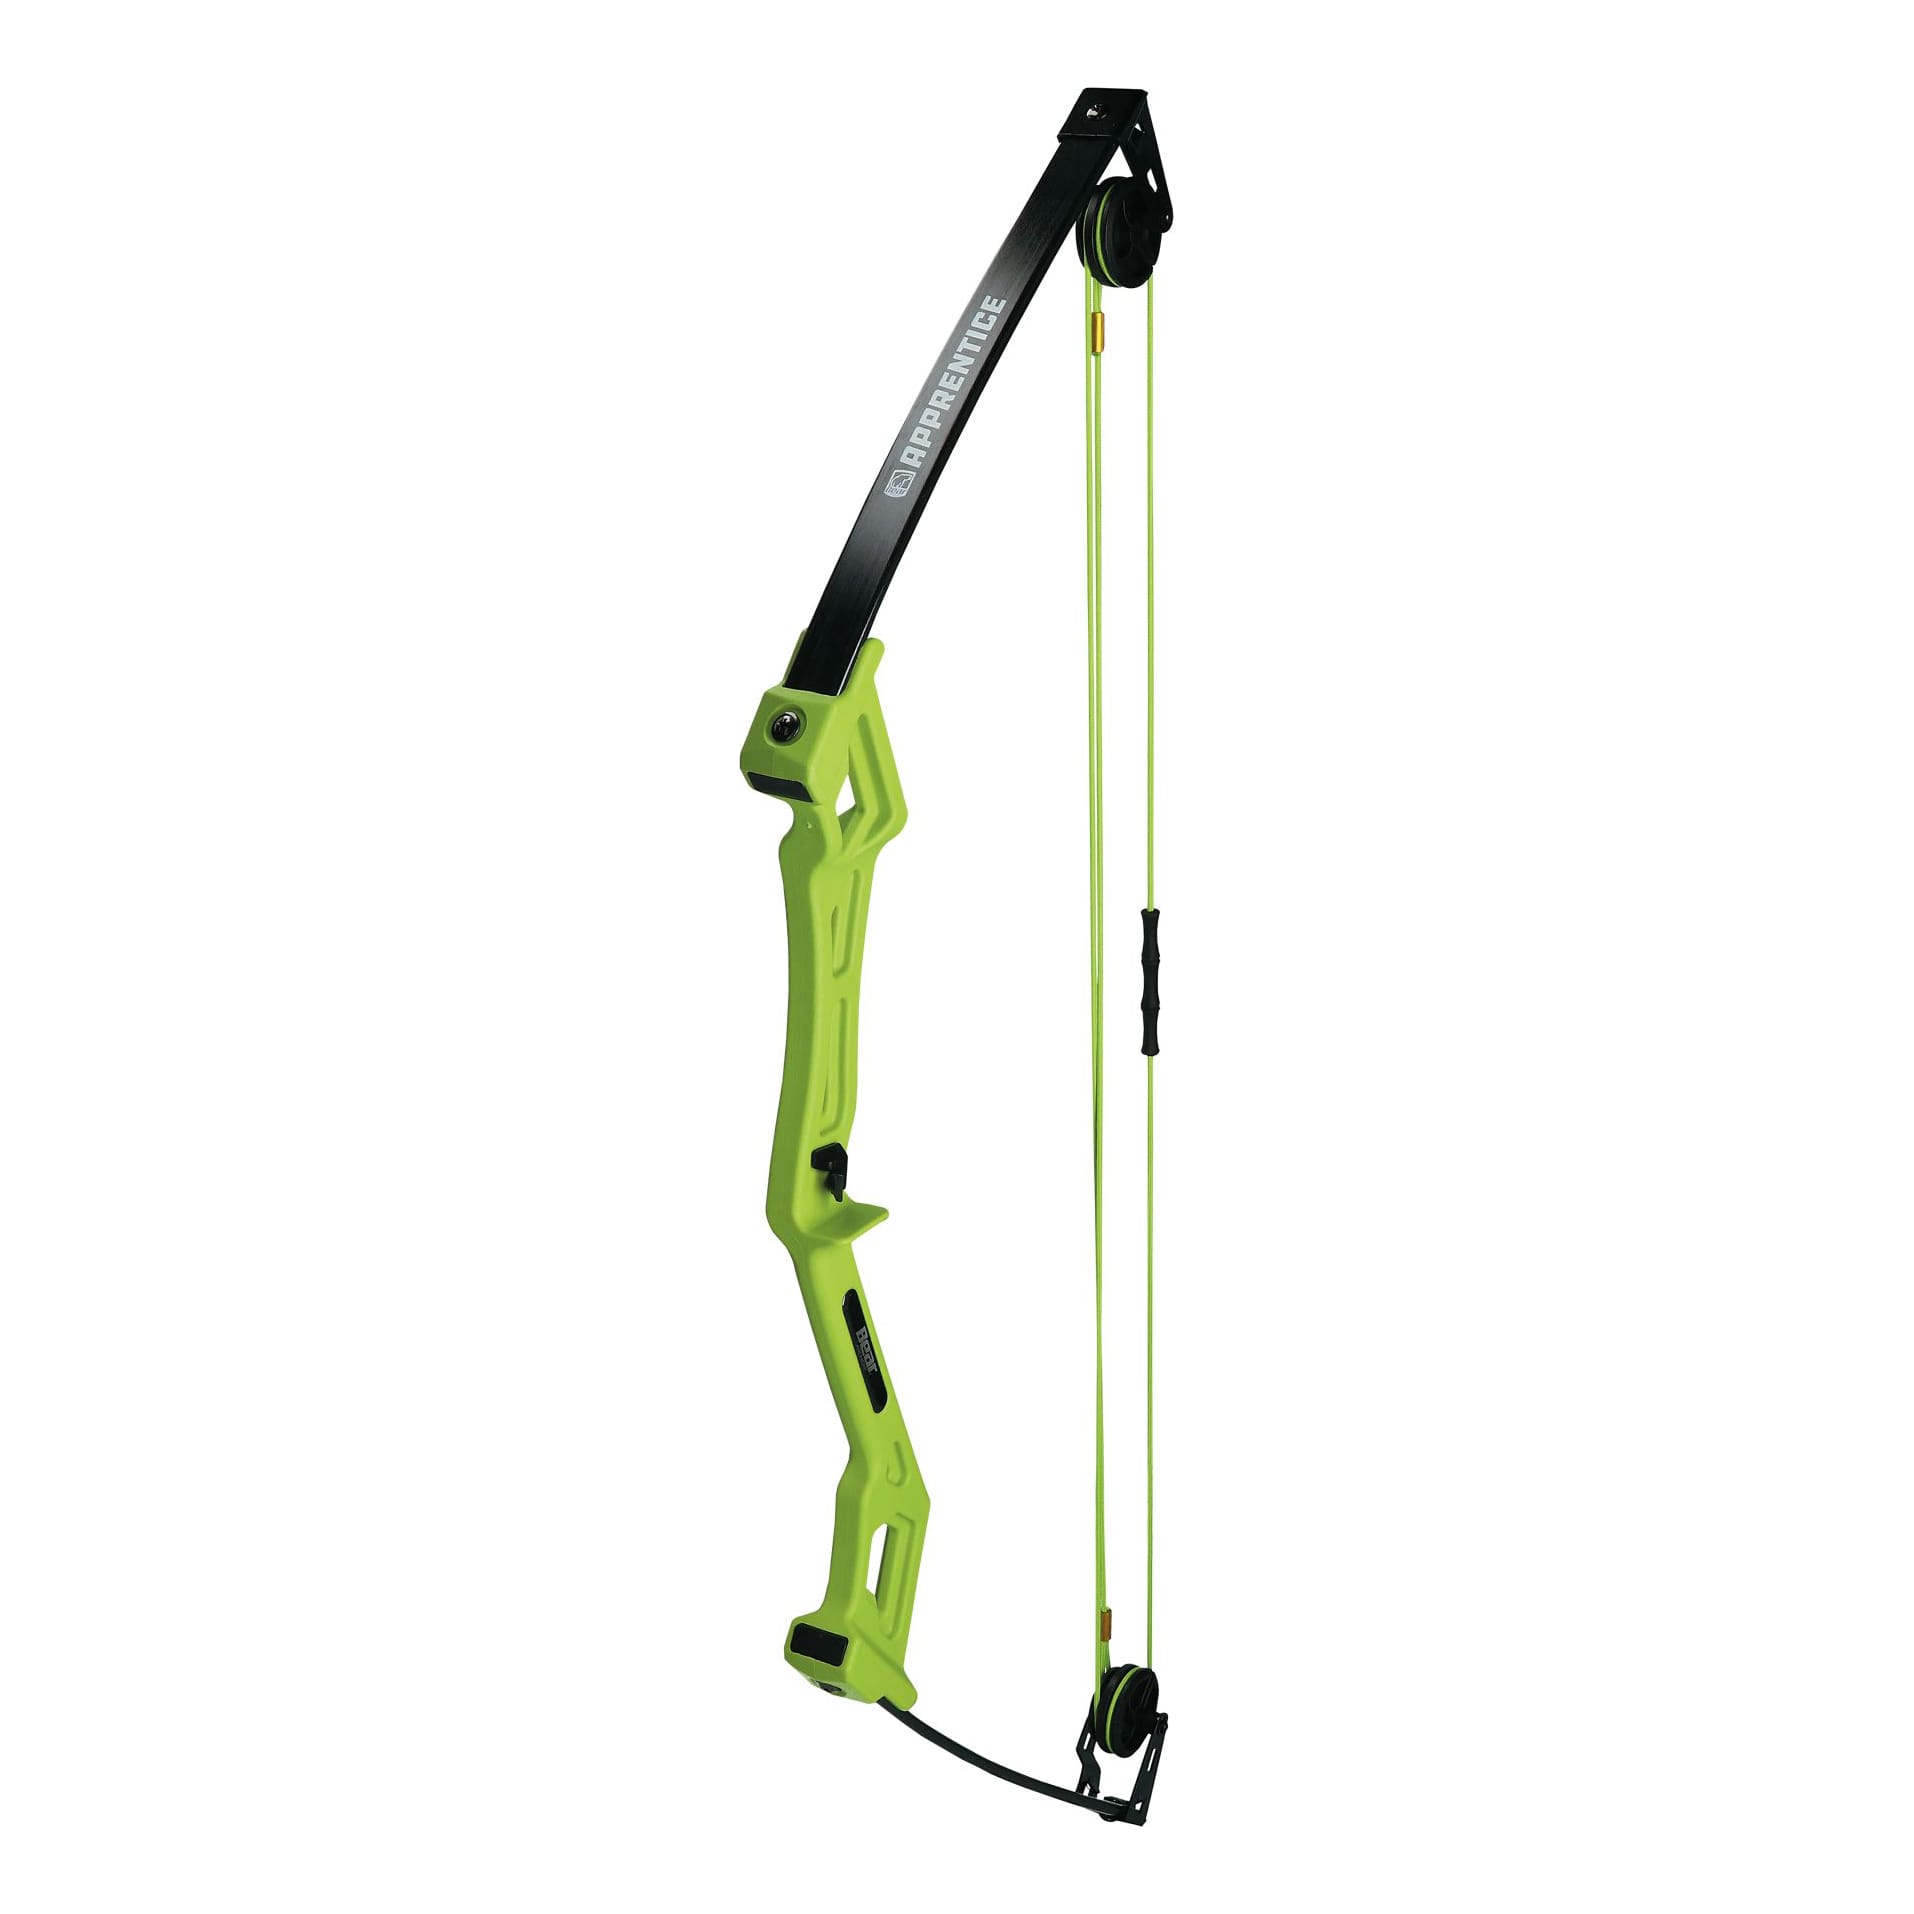 Bear Archery Apprentice Compound Bow for Kids - Fluorescent Green